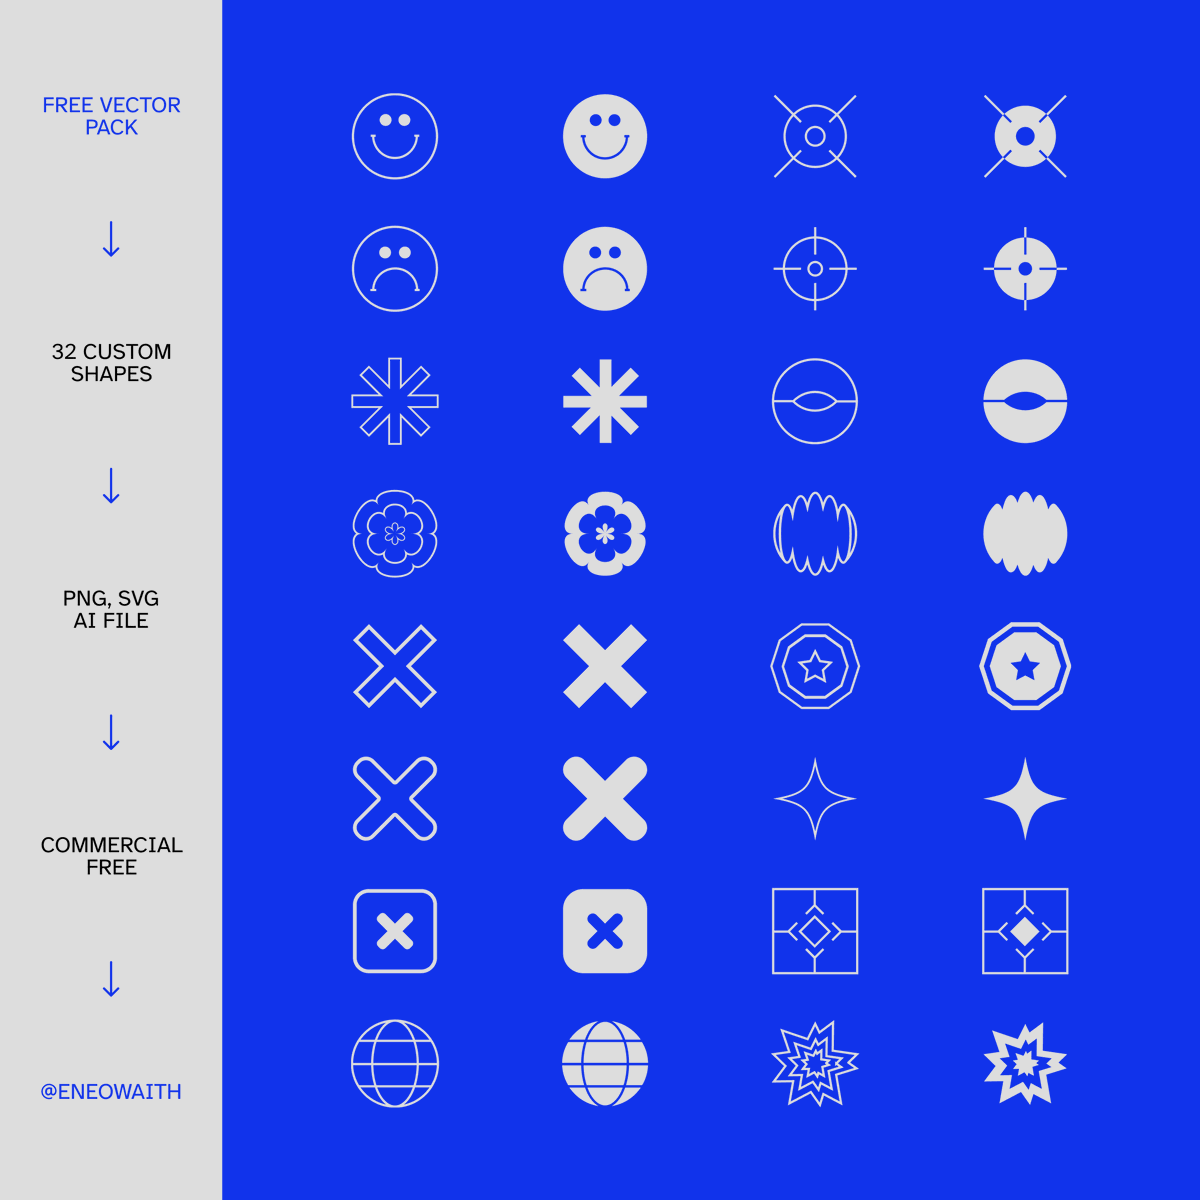 Graphic Designers, I have prepared a free vector pack containing 32 custom shapes for you. 🔗 Link is below. Bon appétit!